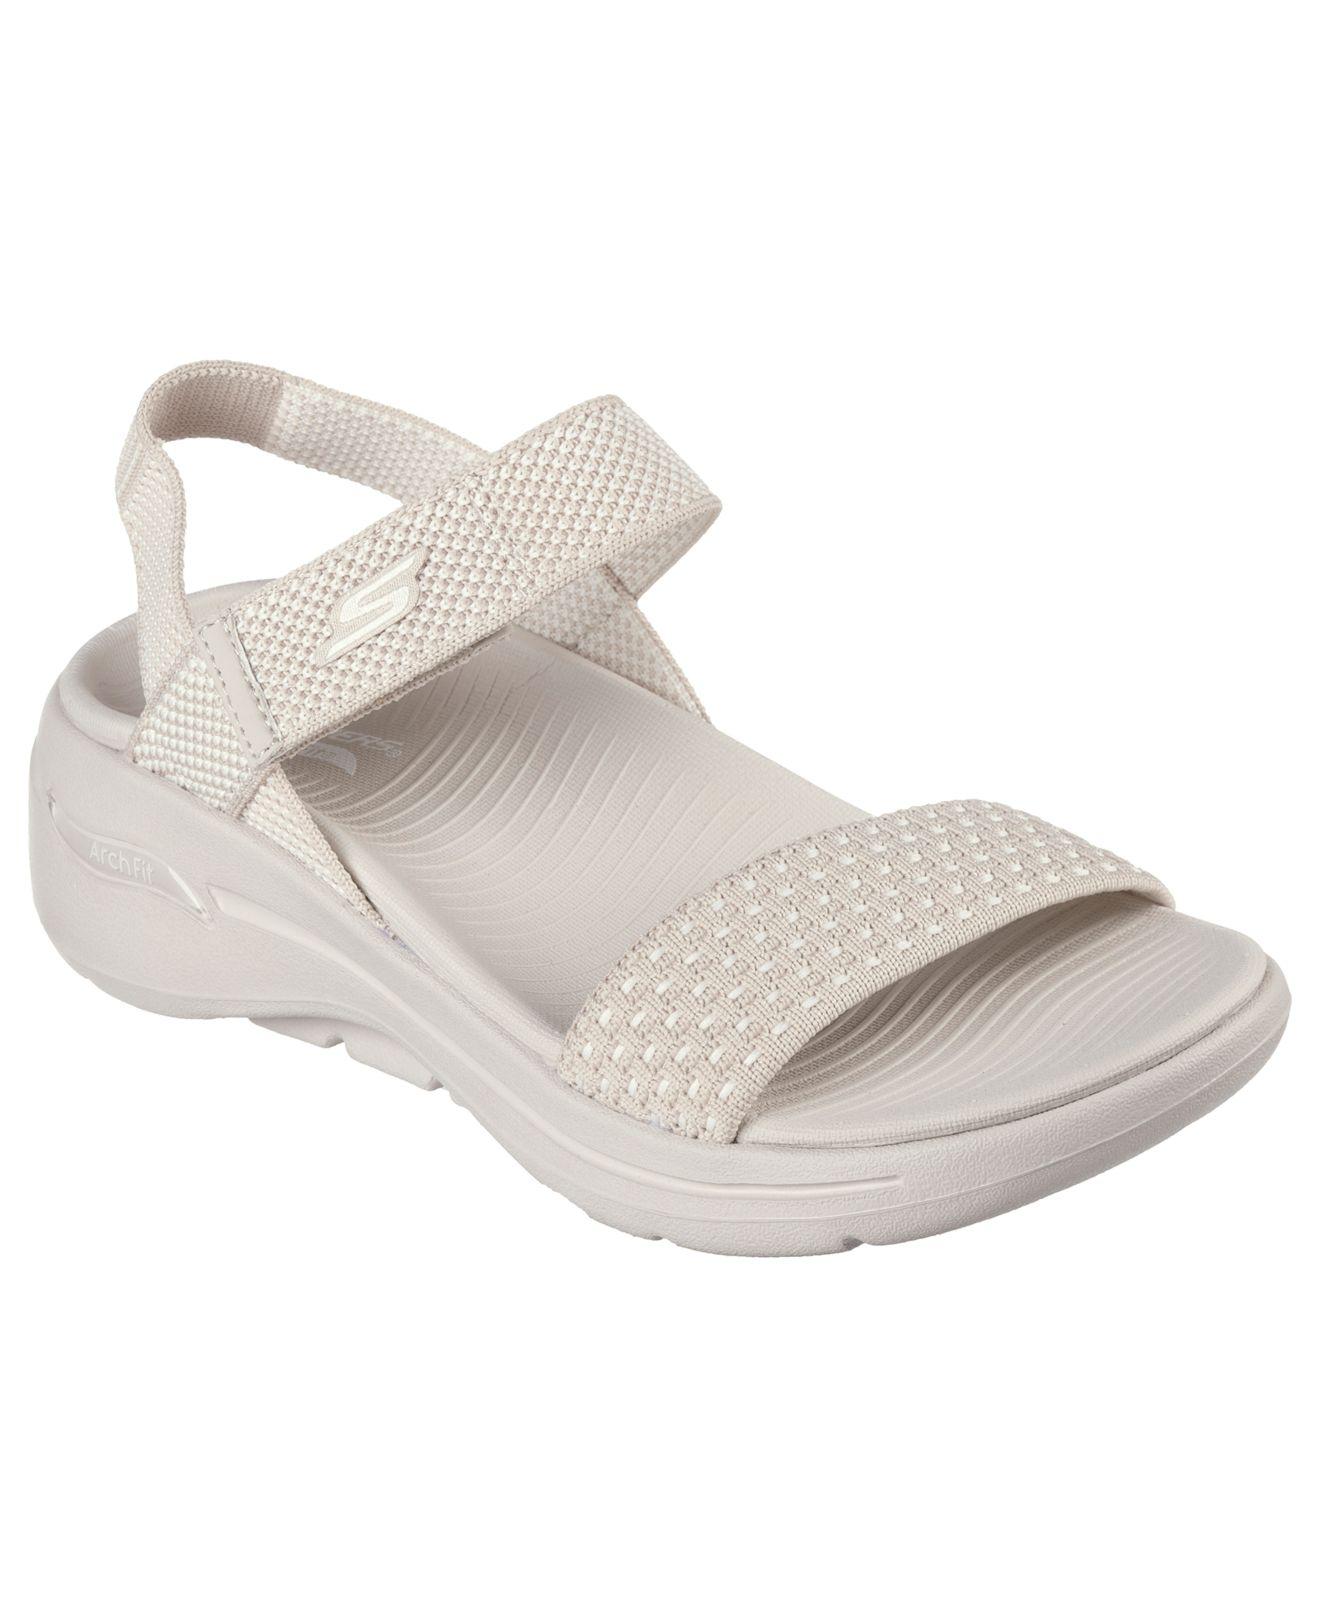 Skechers Go Walk Arch Fit Sandal - Polished Sandals From Finish Line in  White | Lyst